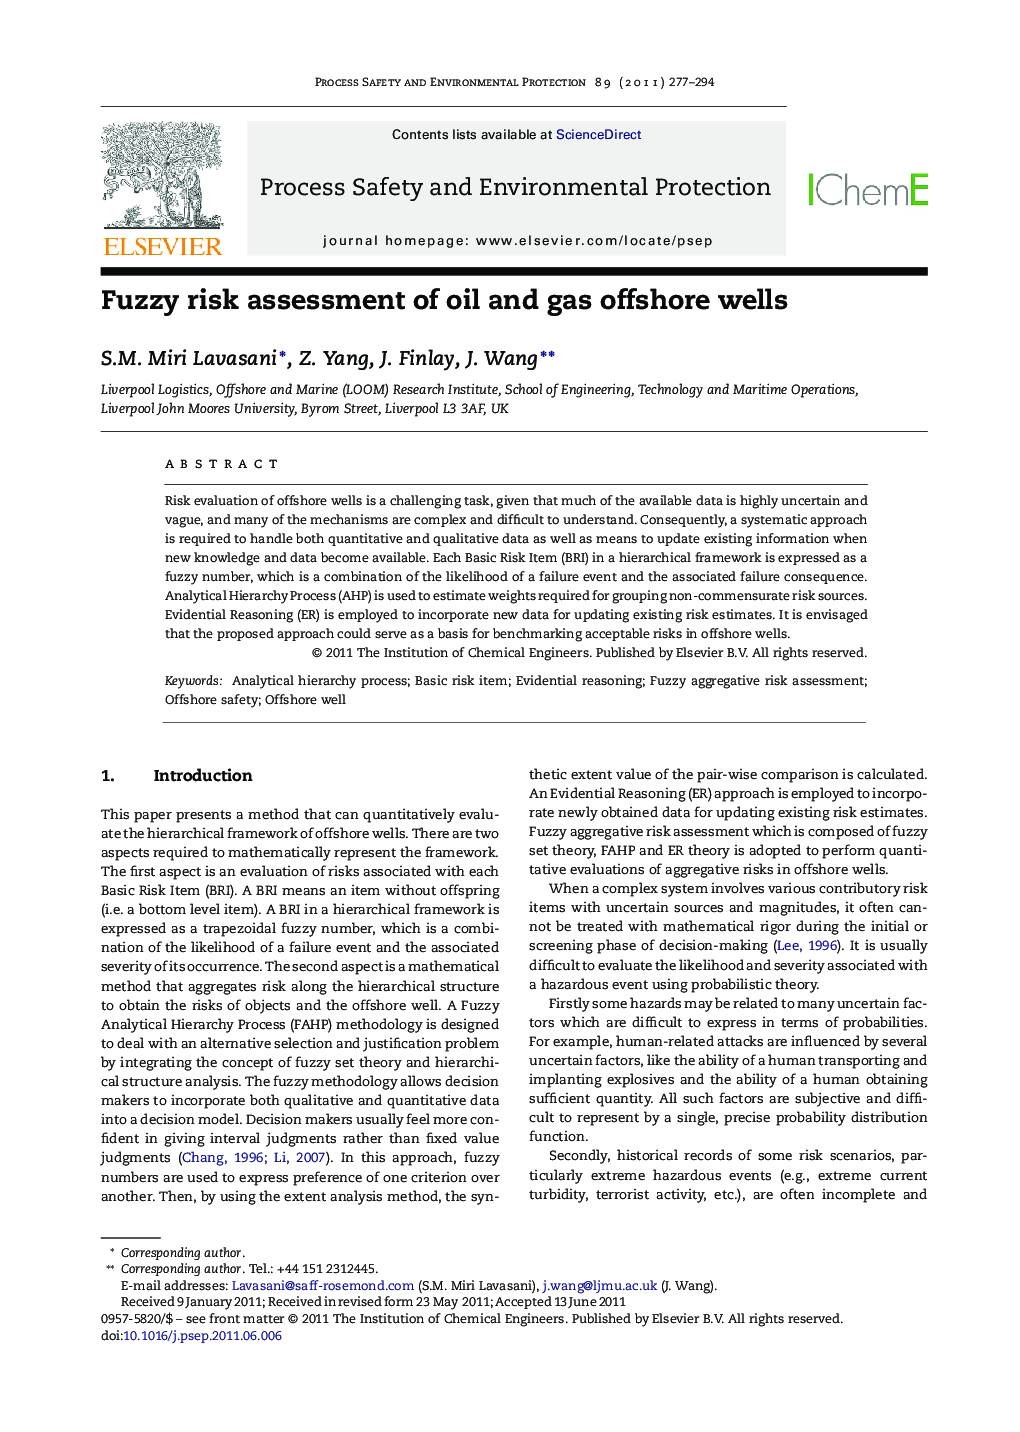 Fuzzy risk assessment of oil and gas offshore wells